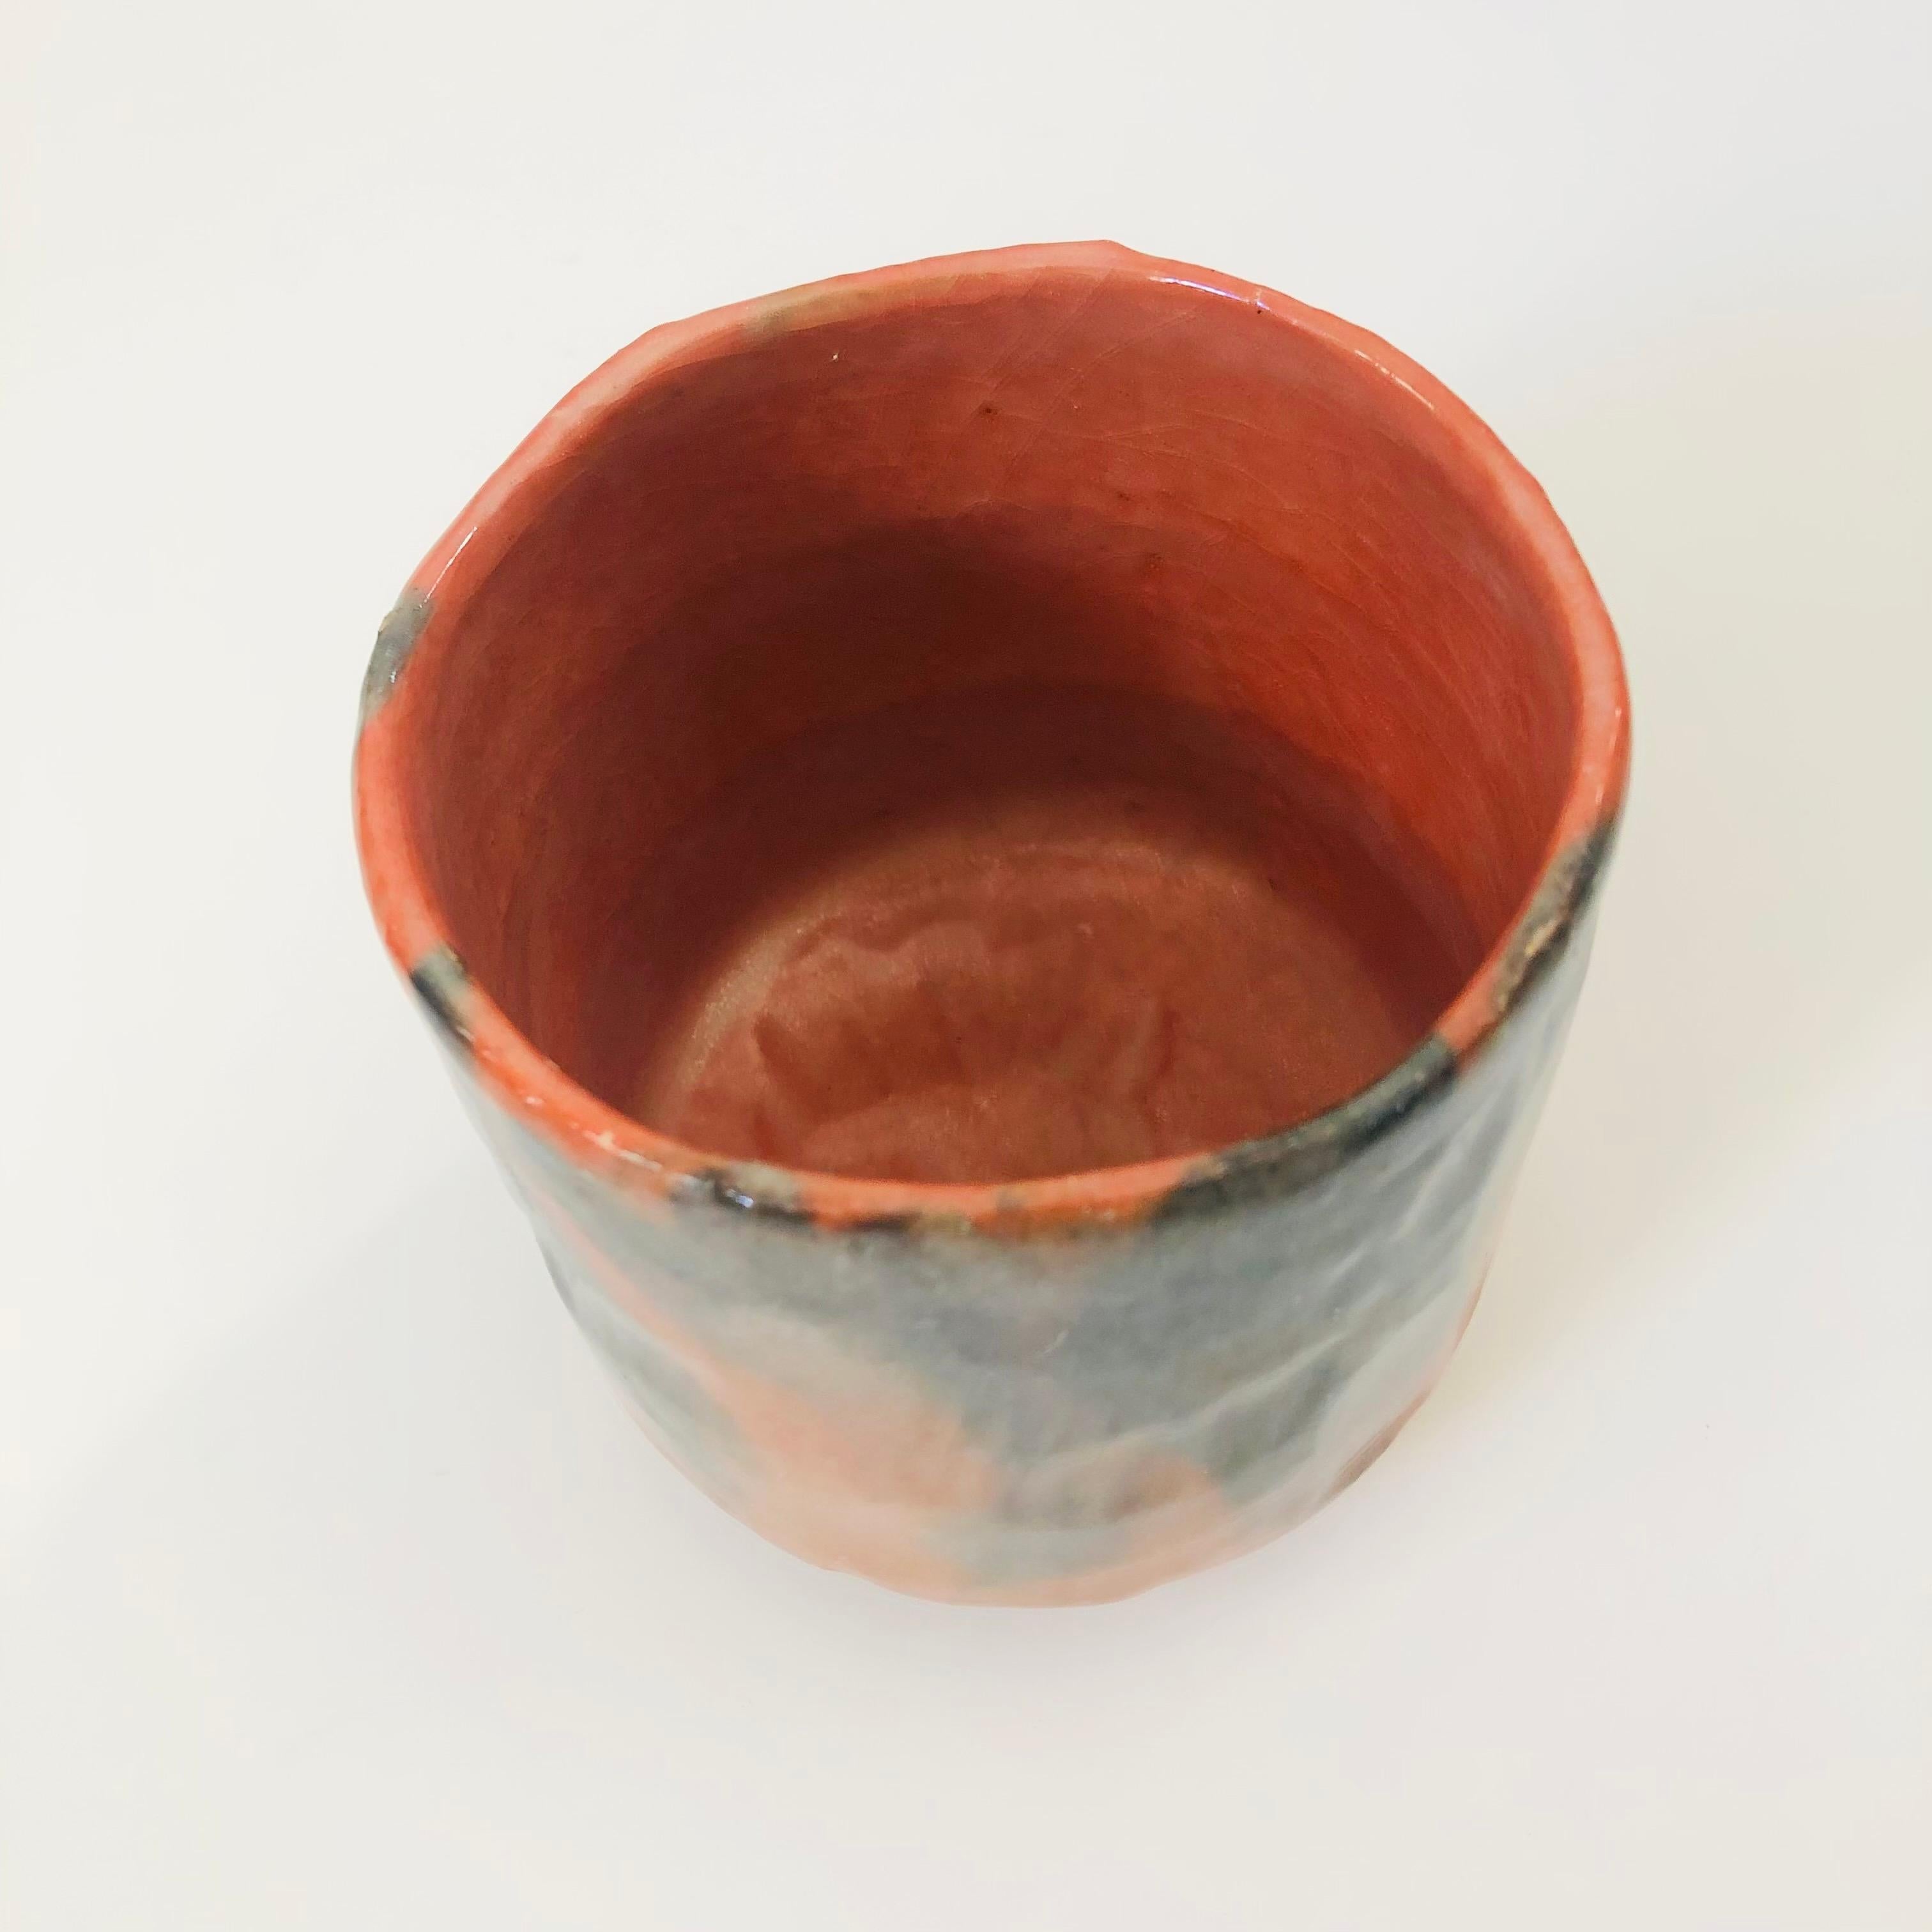 A vintage Japanese red raku pottery vase or bowl. Beautiful variation to the wood fired glaze that ranges from natural terra cotta to black. Lovely organic shape. Perfect for using as a bowl or planter. Stamped on the base by the maker.

